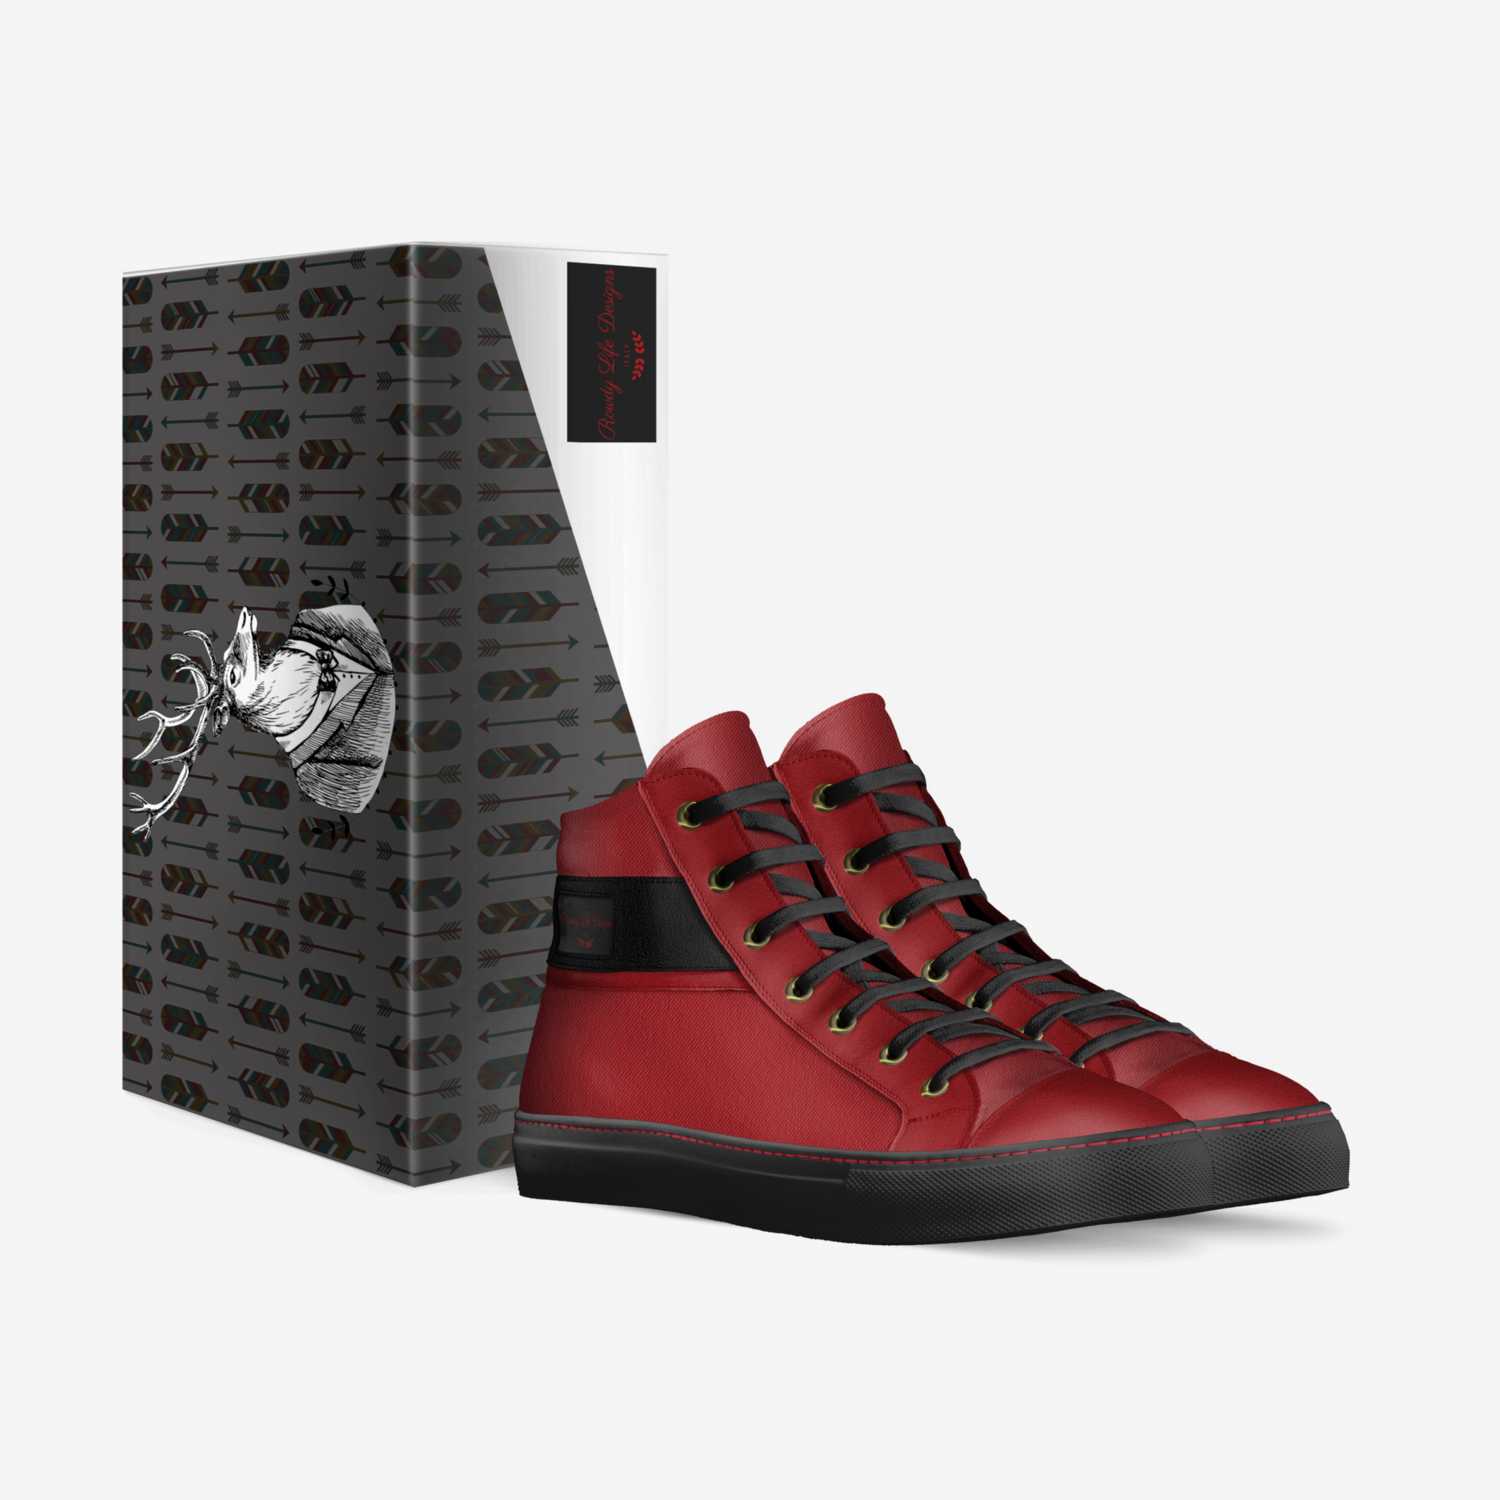 Rowdy Life Designs custom made in Italy shoes by Chris Nurko | Box view